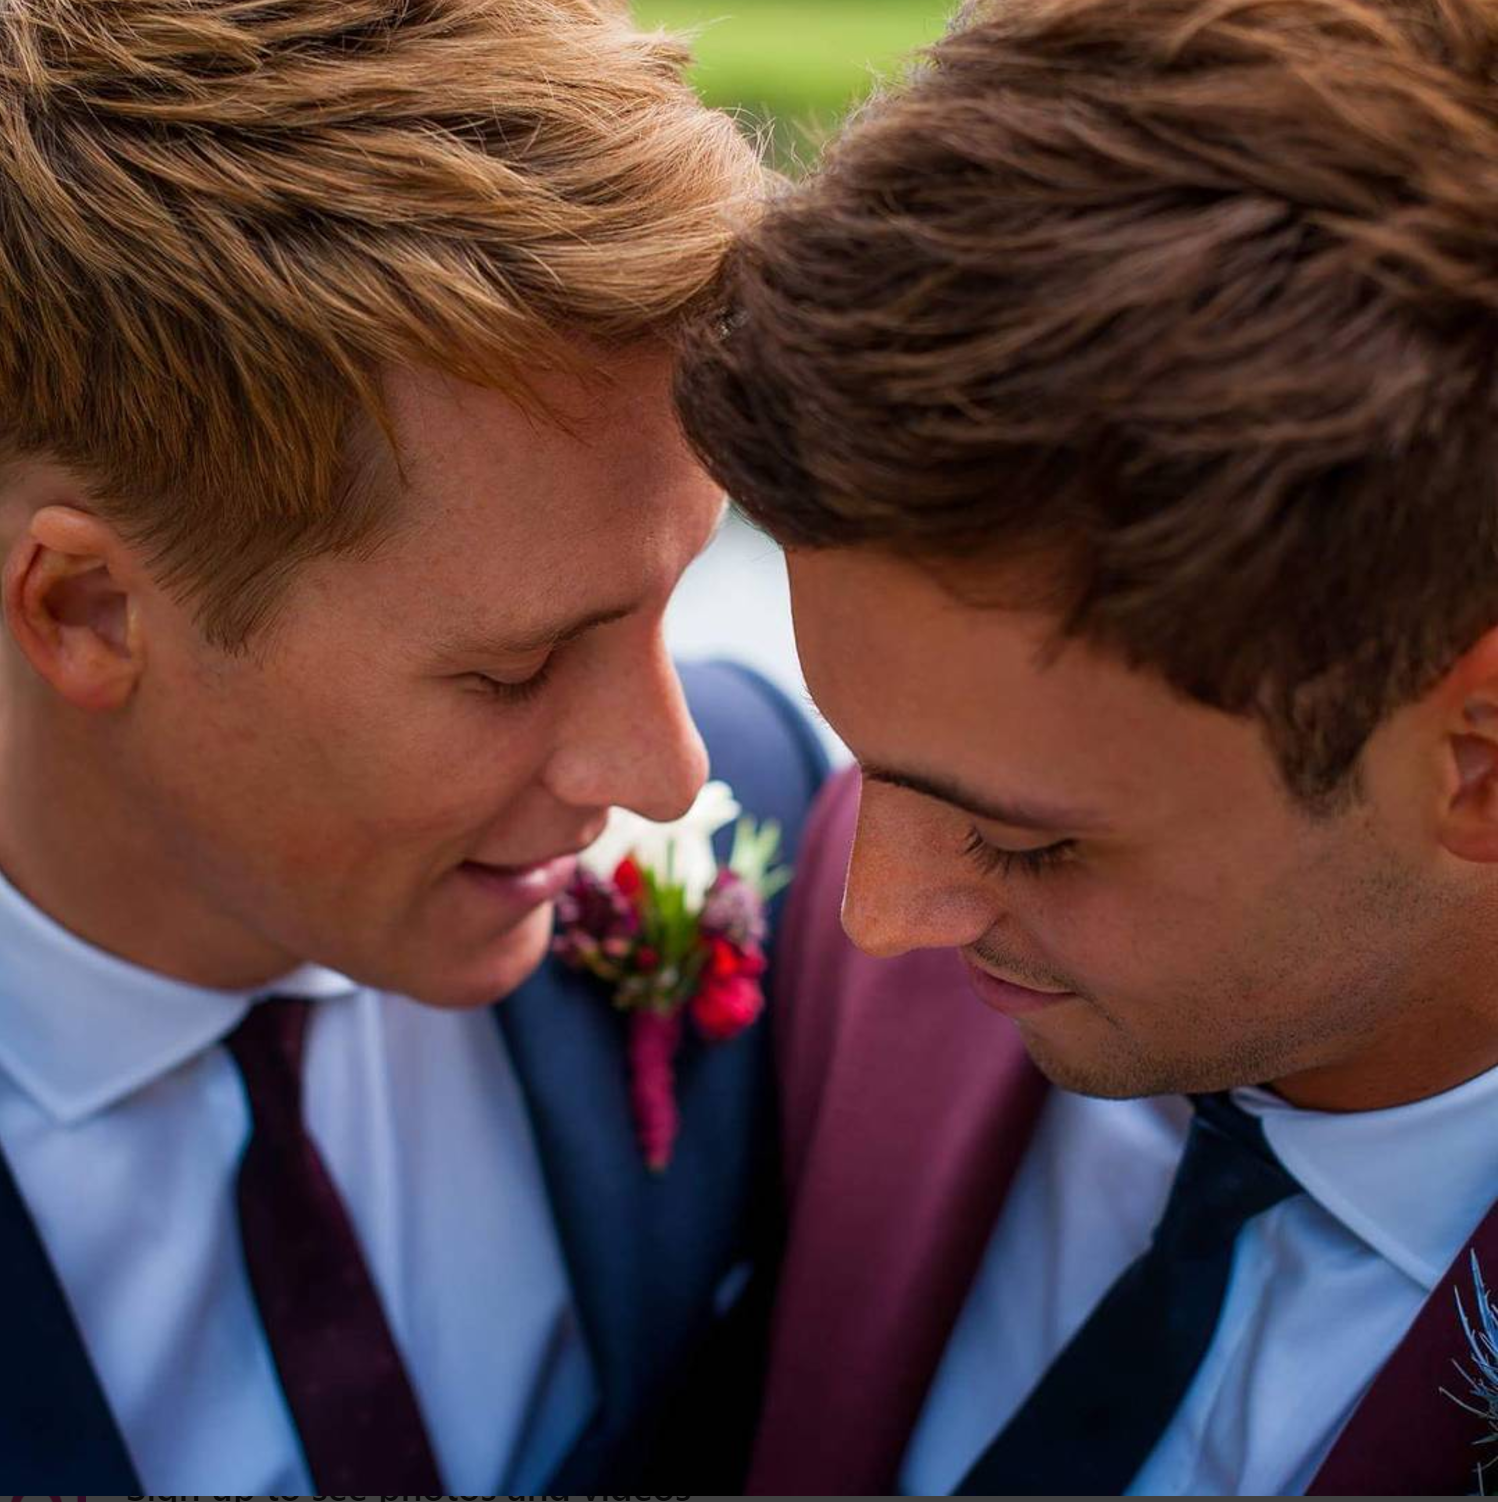 Olympic Diver Tom Daley marries partner film director and screenwriter Dustin Lance Black